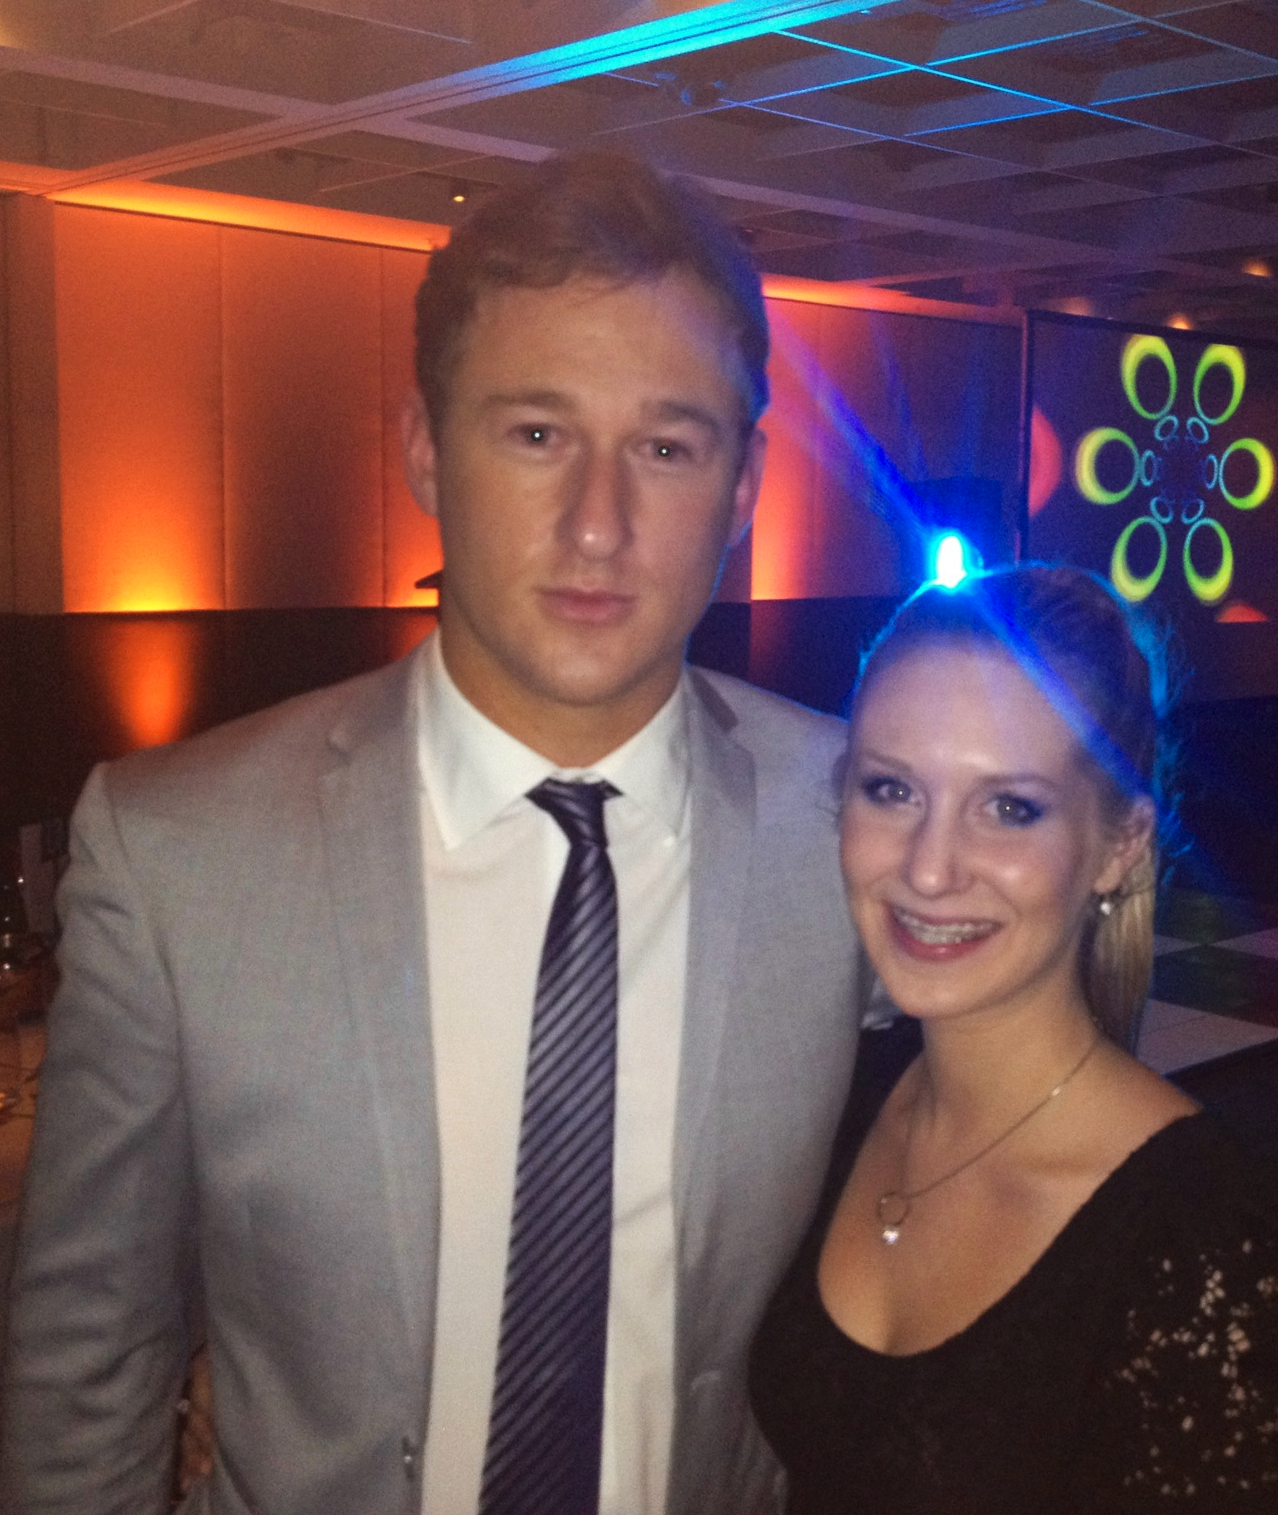 James Pratt with Emily Whitechurch at Channel Nine Gold Week event.